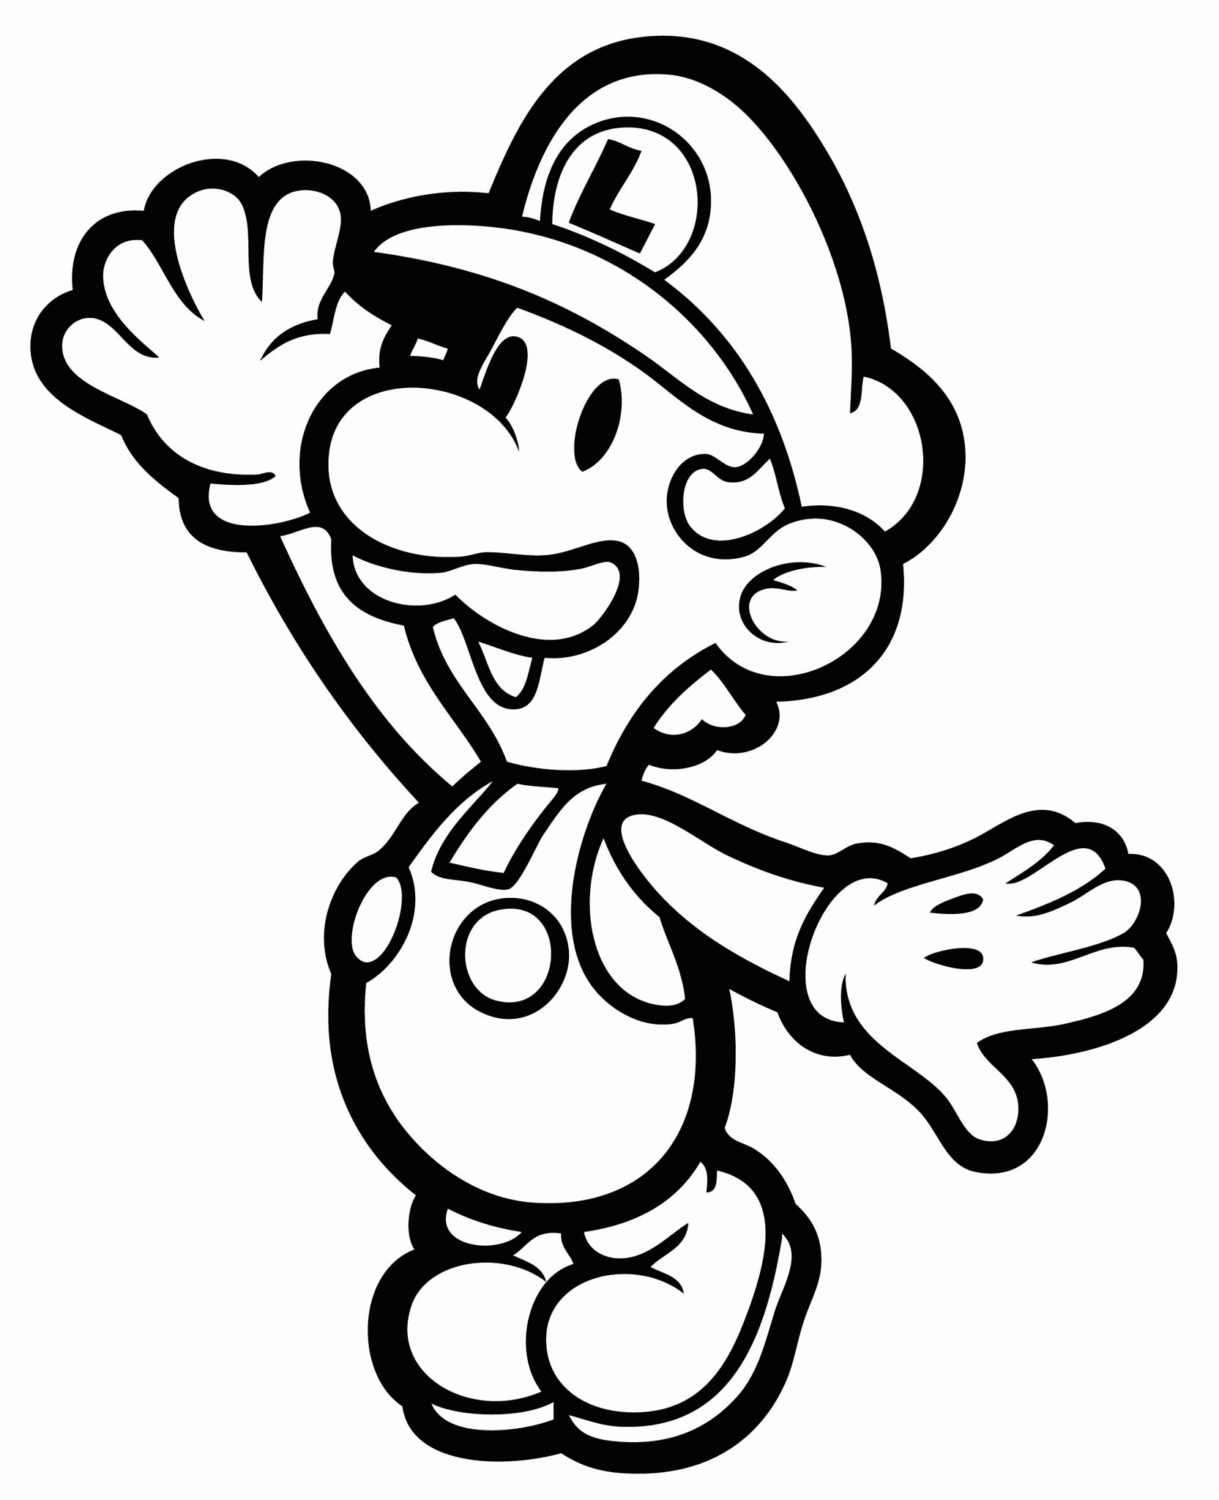 Luigi Coloring Pages | Coloring Pages To Print